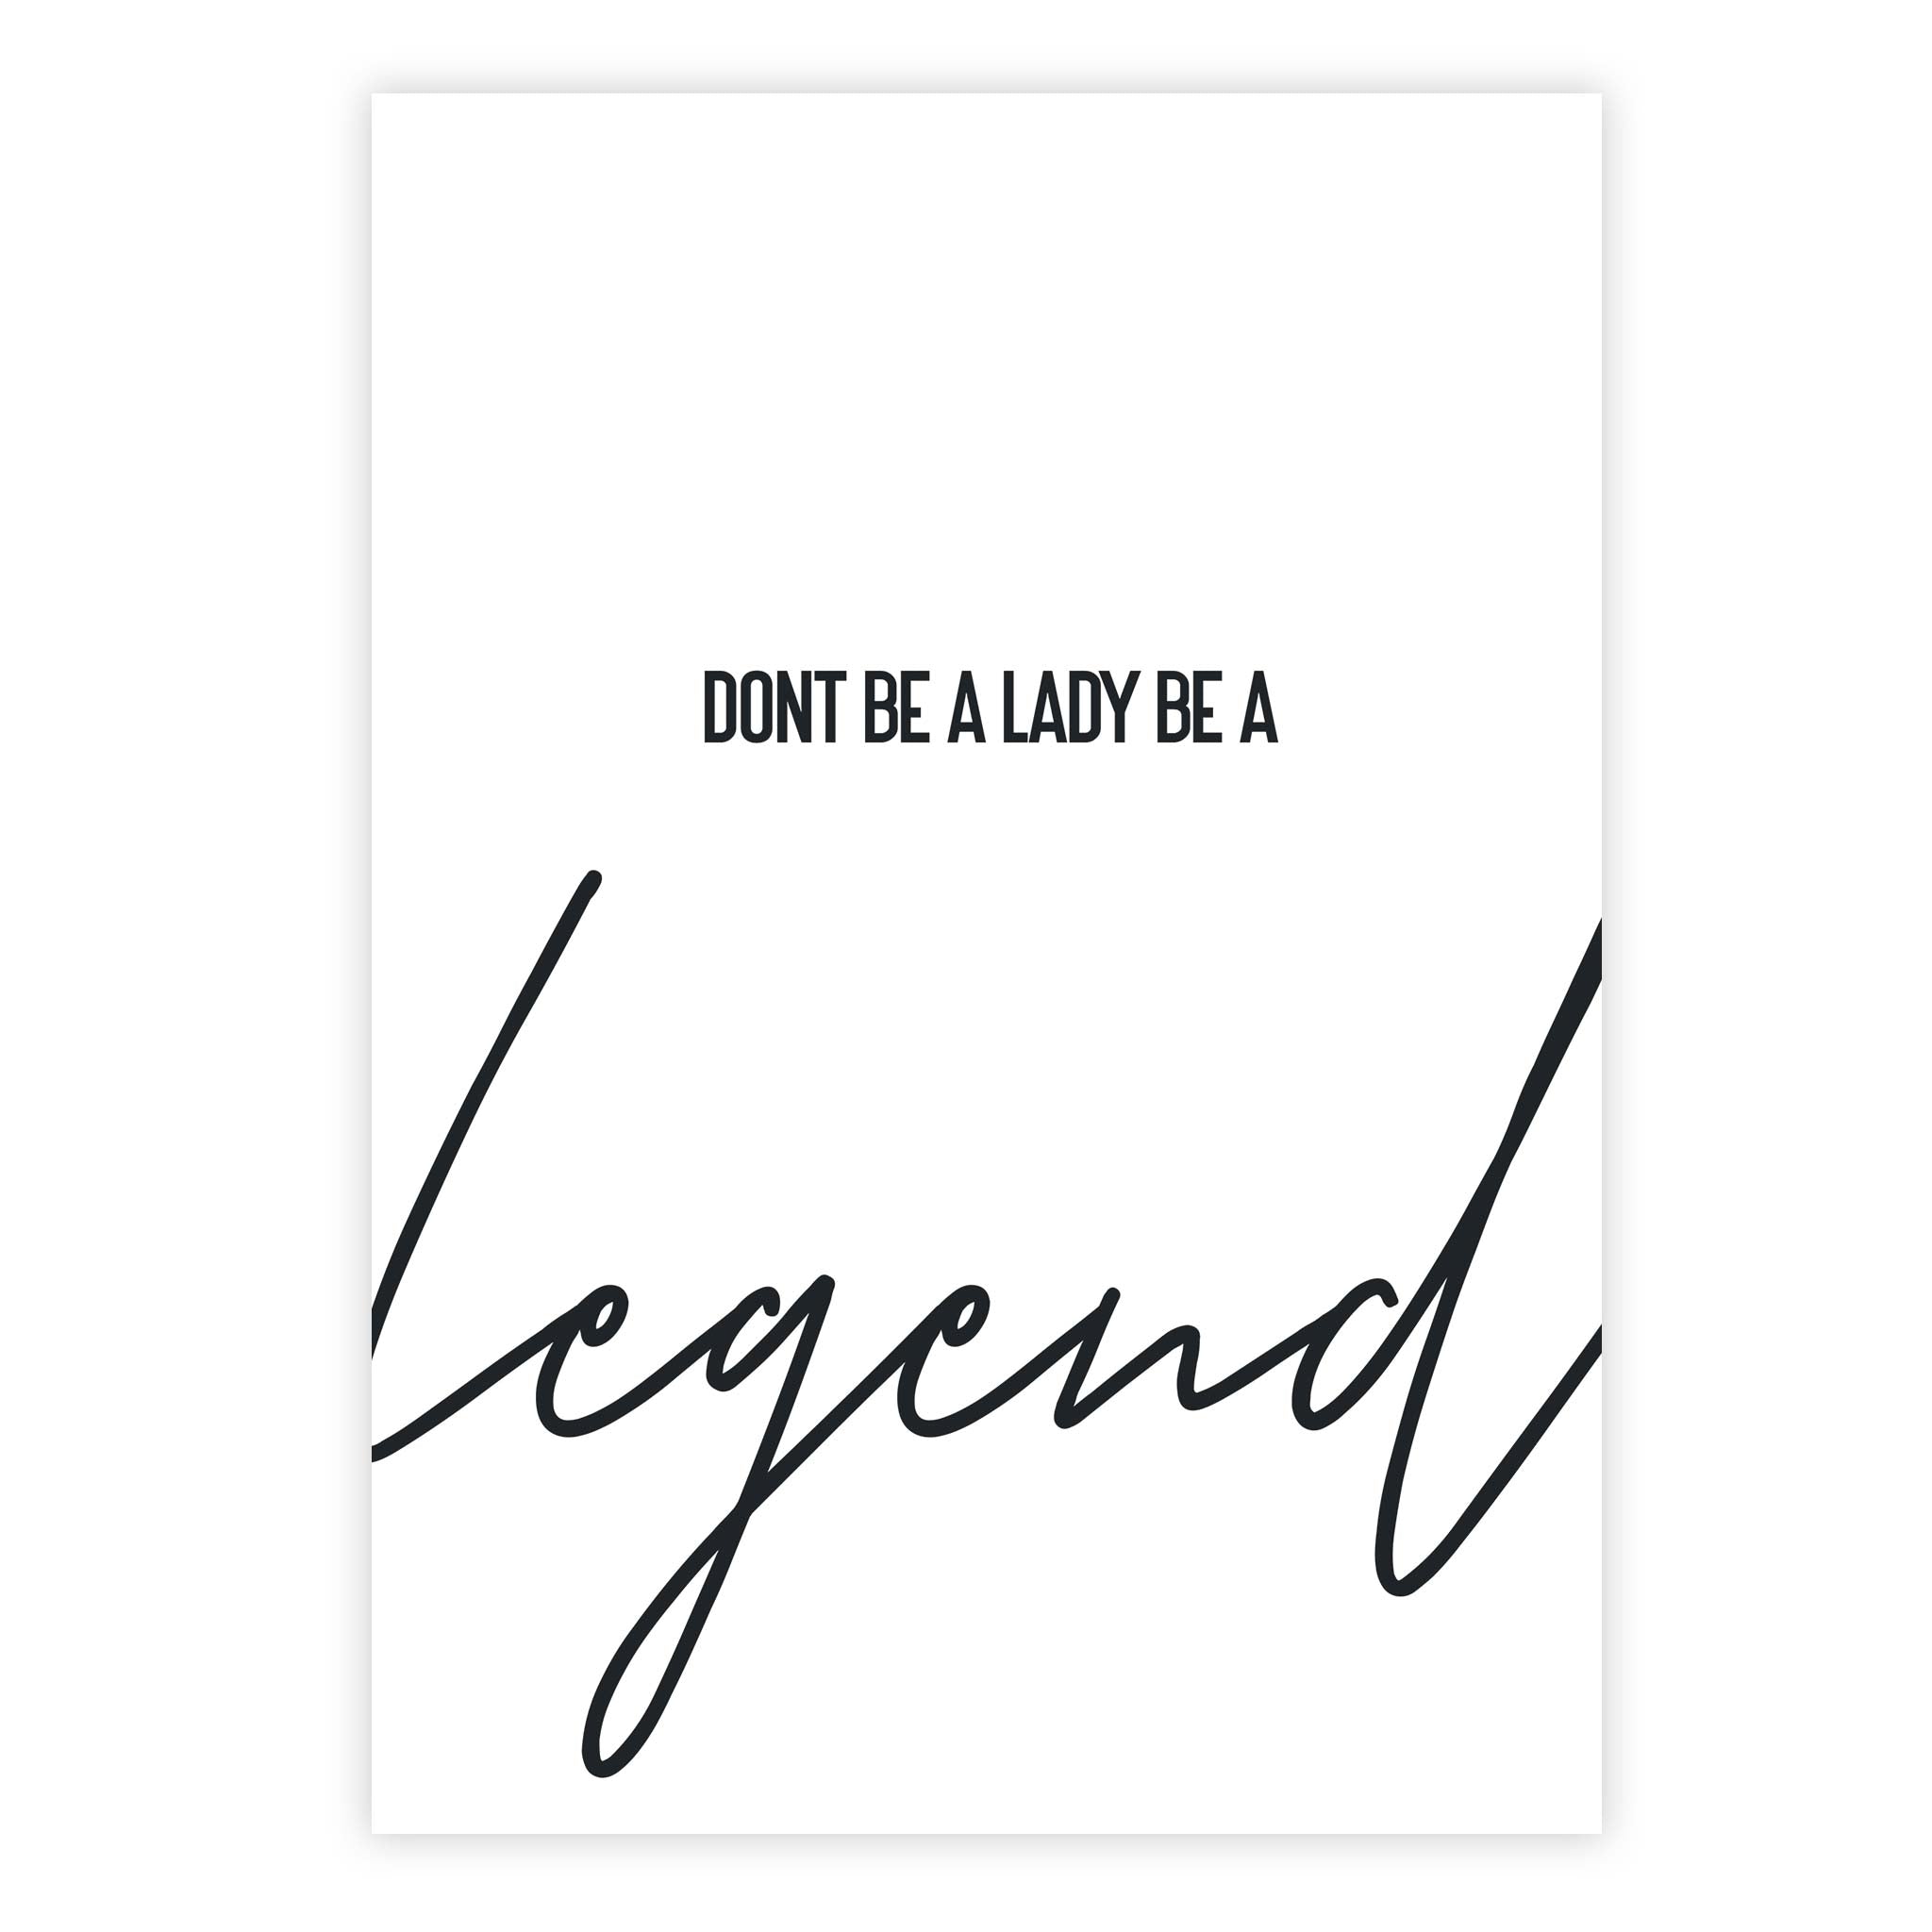 Dont be a lady be a legend